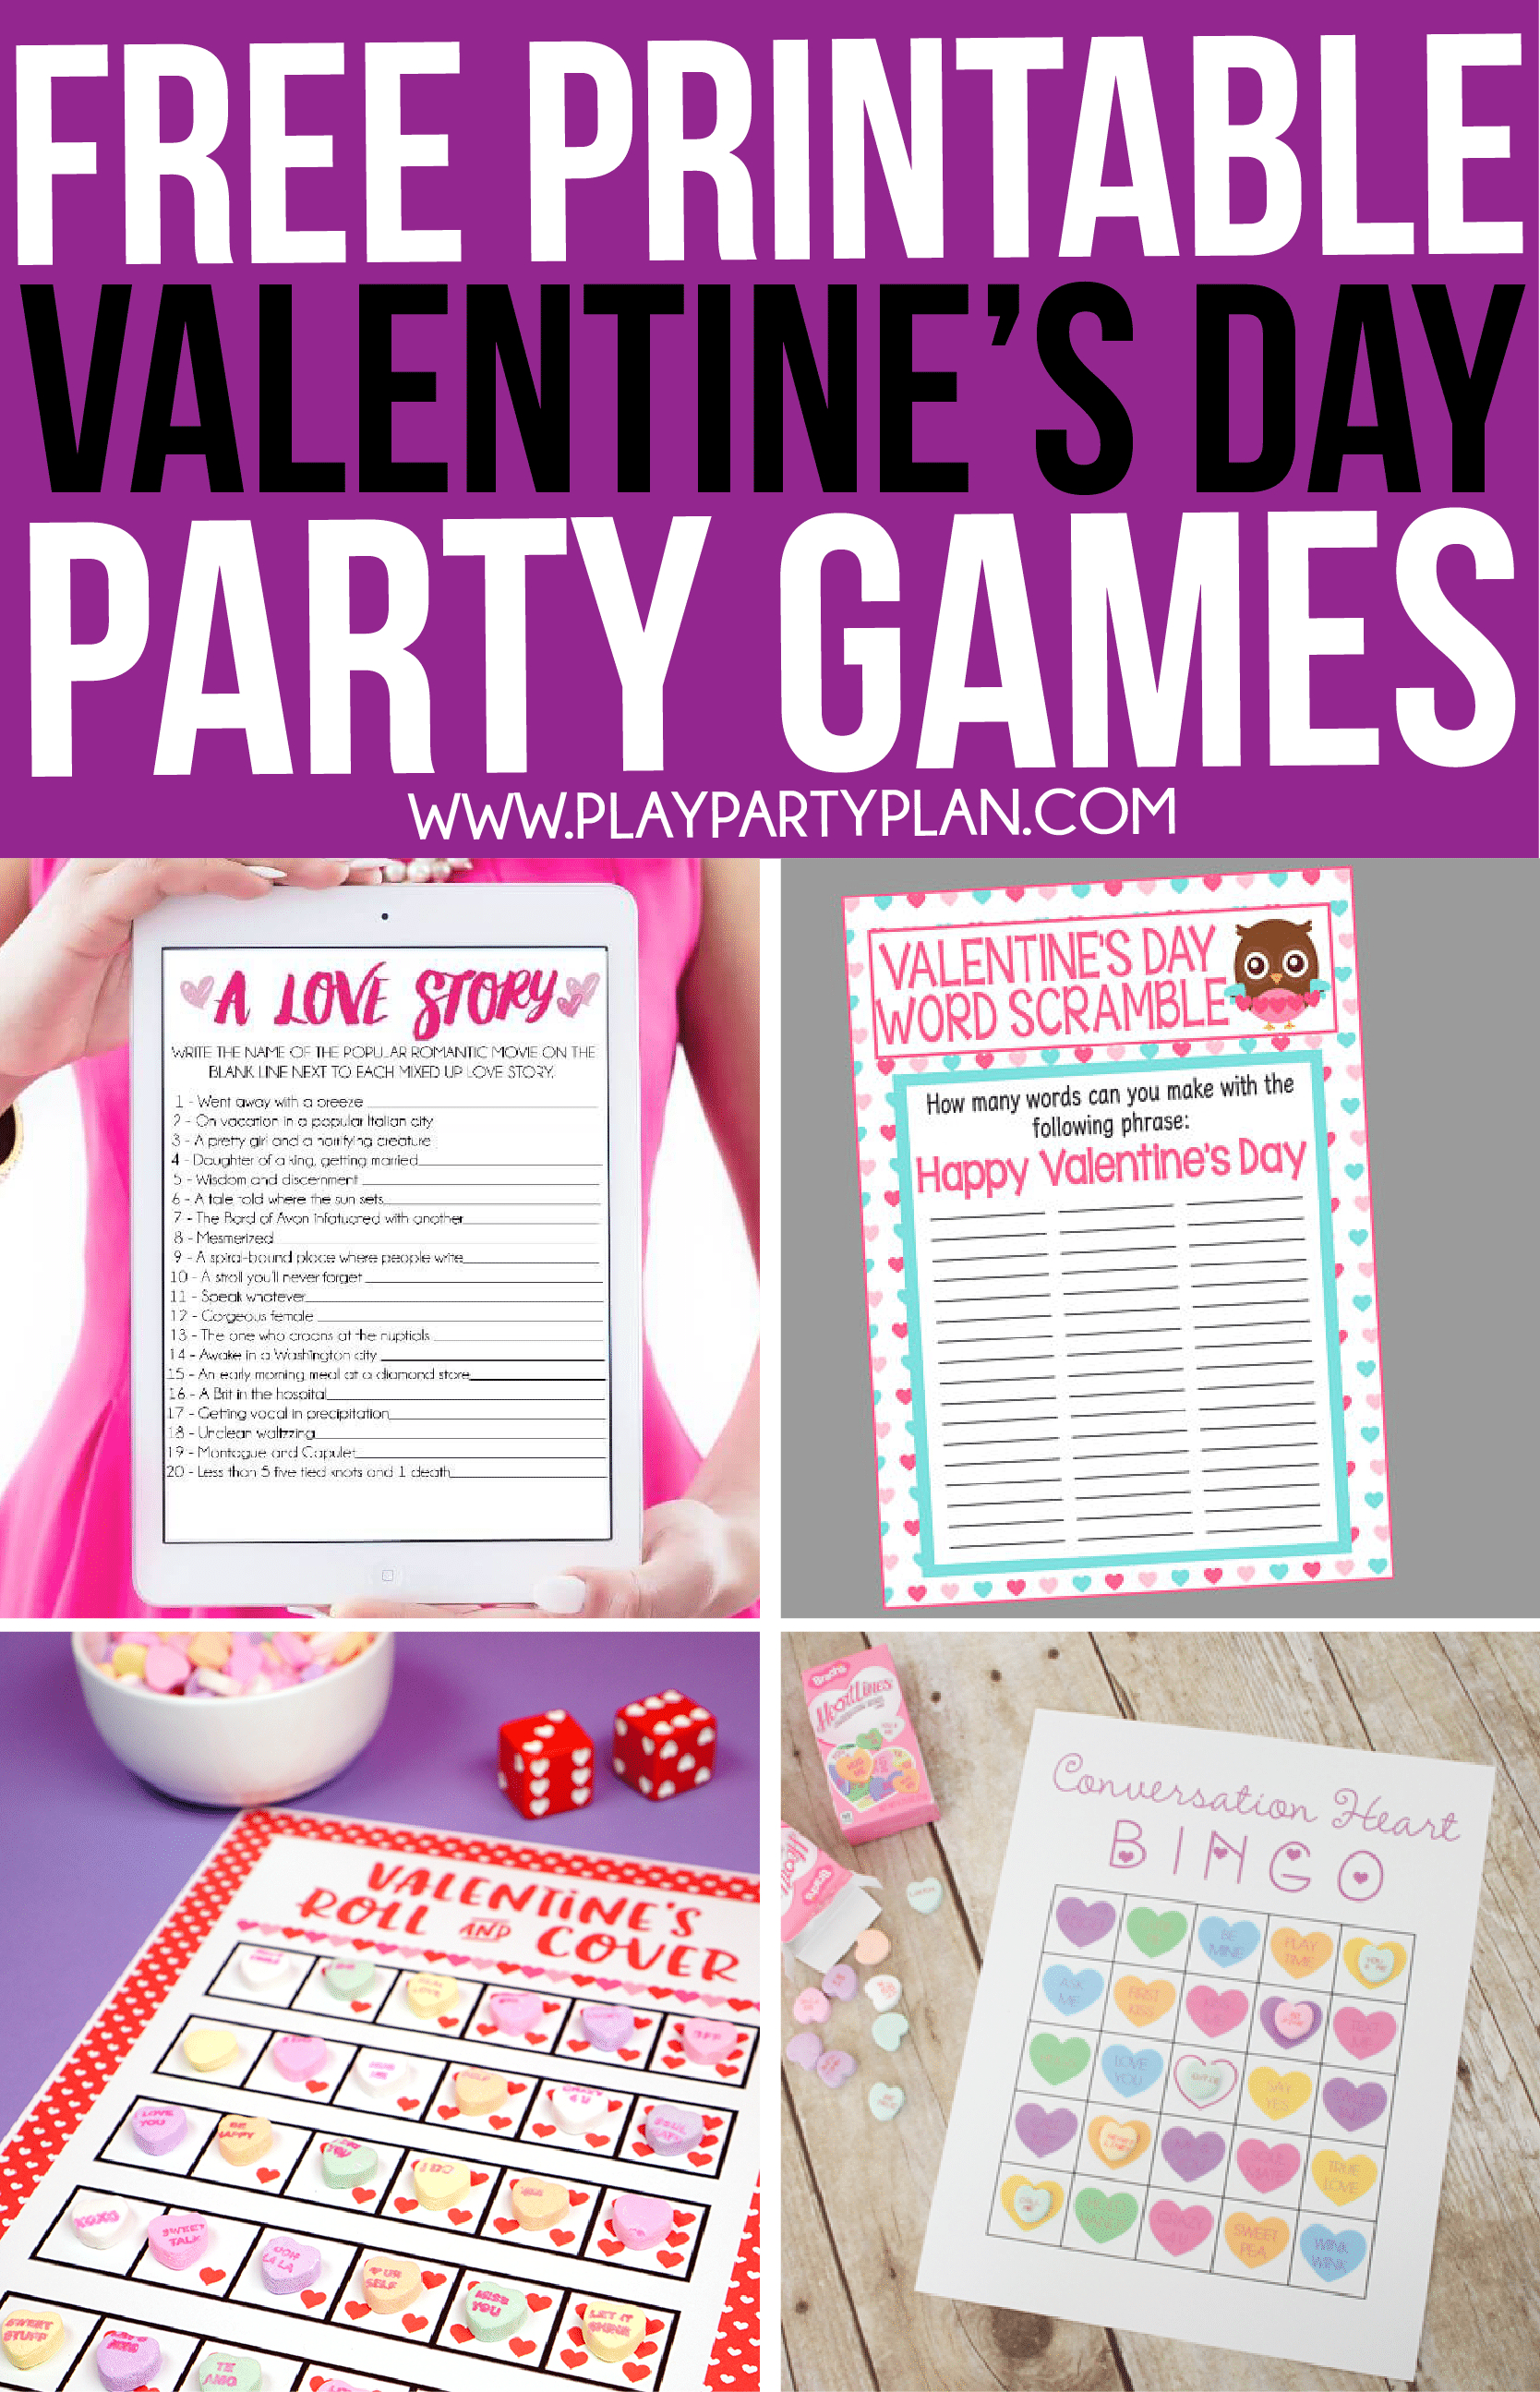 30 Valentine's Day Games Everyone Will Absolutely Love - Play Party Plan - Free Printable Group Games